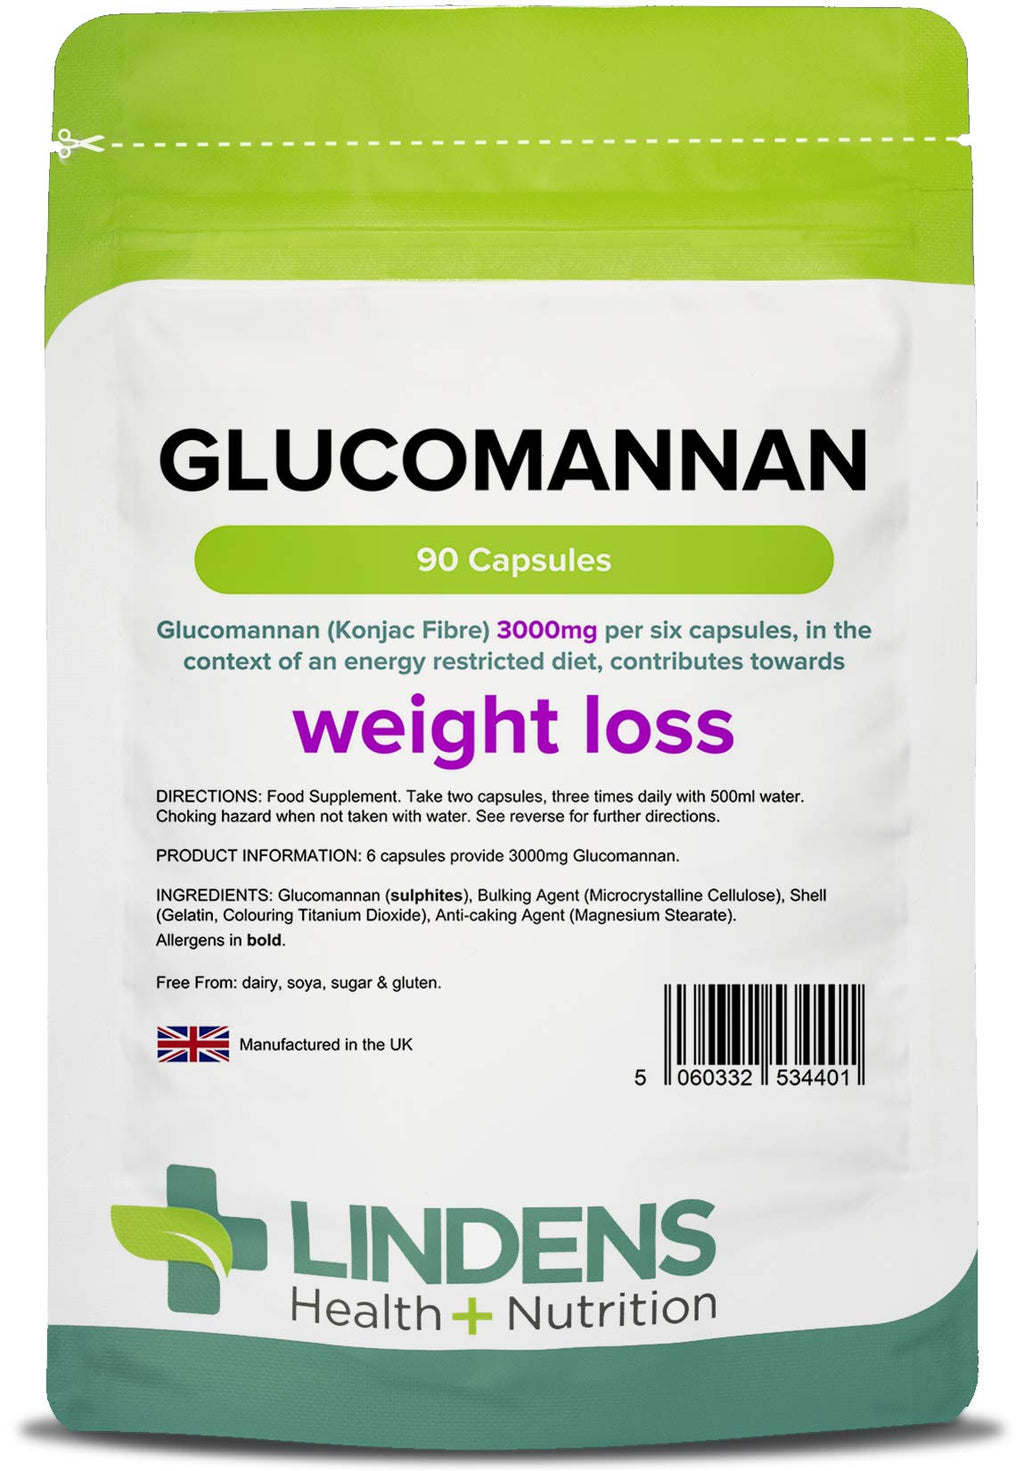 [Australia] - Lindens Glucomannan (Konjac Fibre) 500mg Capsules - 90 Pack - Weight Loss aid, contributing Towards The Reduction of Appetite That is Lindens #1 Weight Loss Supplement - UK Manufacturer, Letterbox Friendly 90 Count (Pack of 1) 